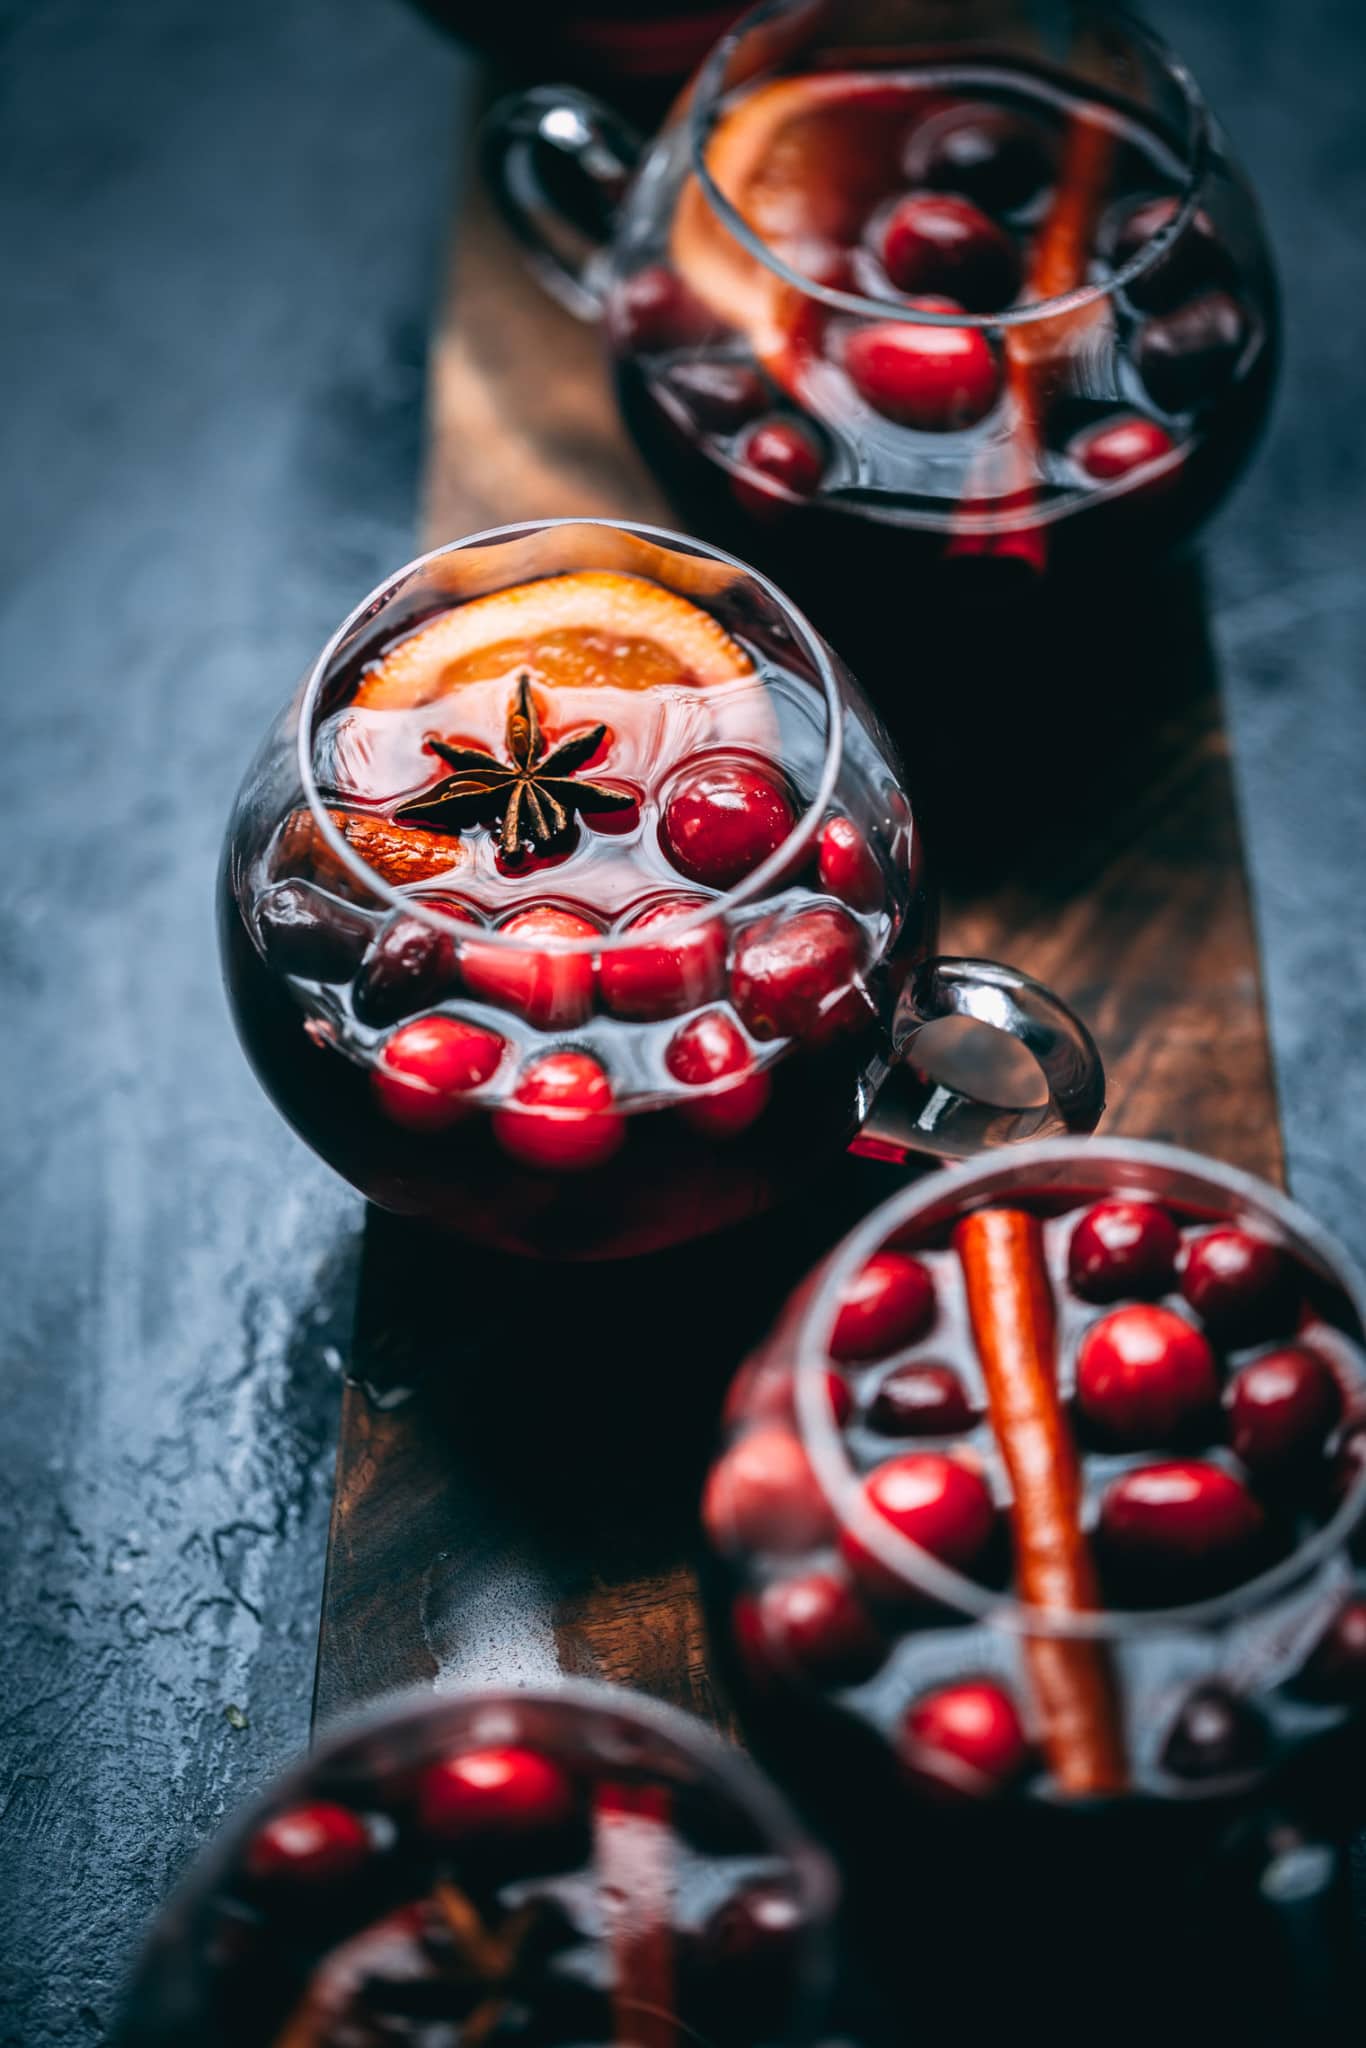 Glasses of Mulled wine garnished with fresh cranberries, cinnamon sticks and lemon slices.